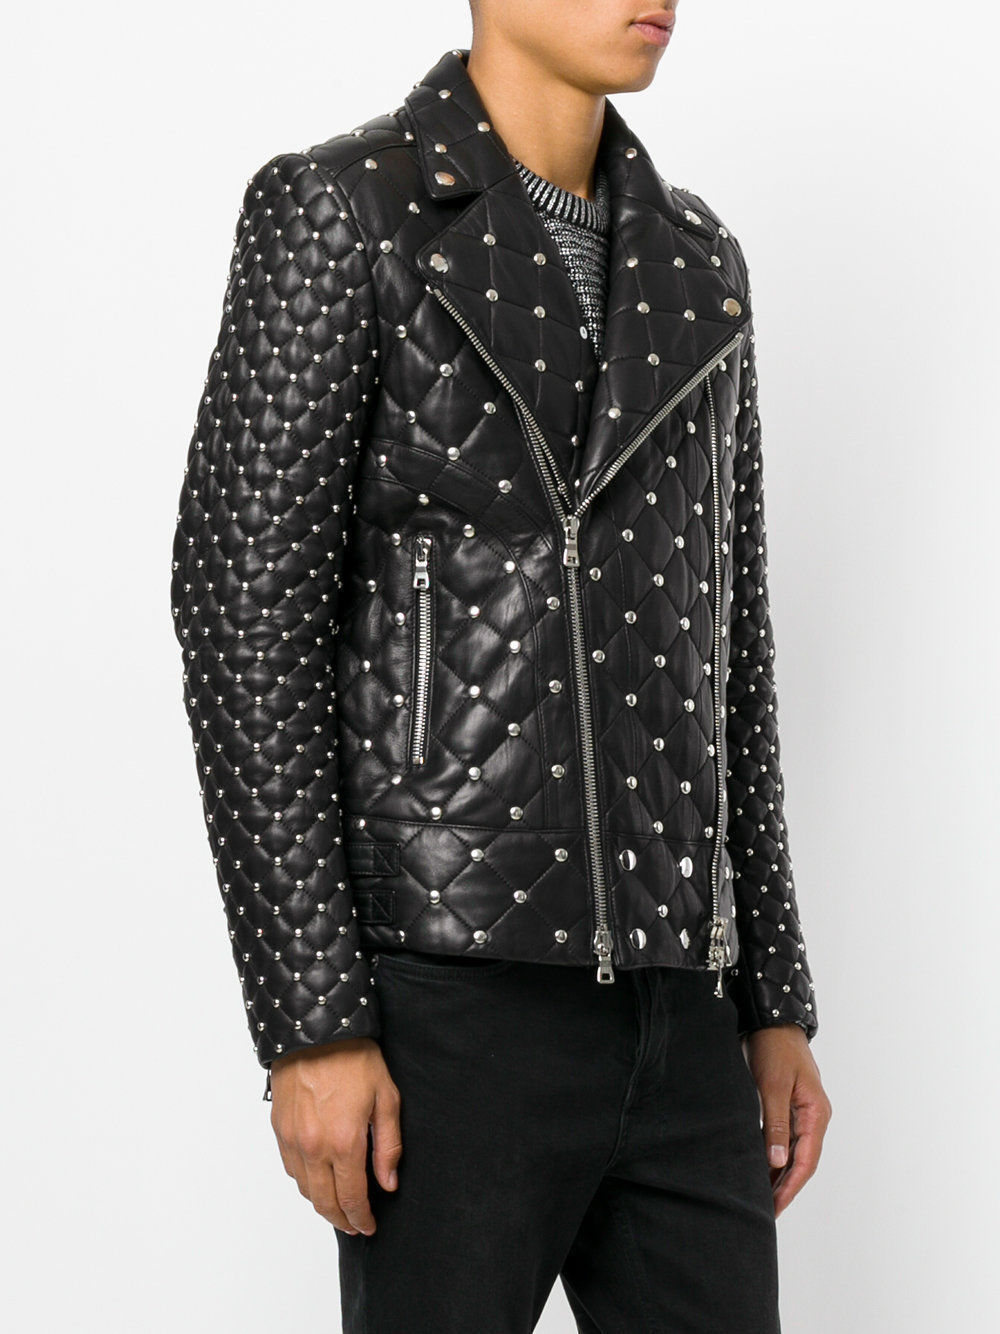 MEN HANDMADE FASHION FULL BLACK QUILTED AND STUDDED LEATHER JACKET SILVER STUDS